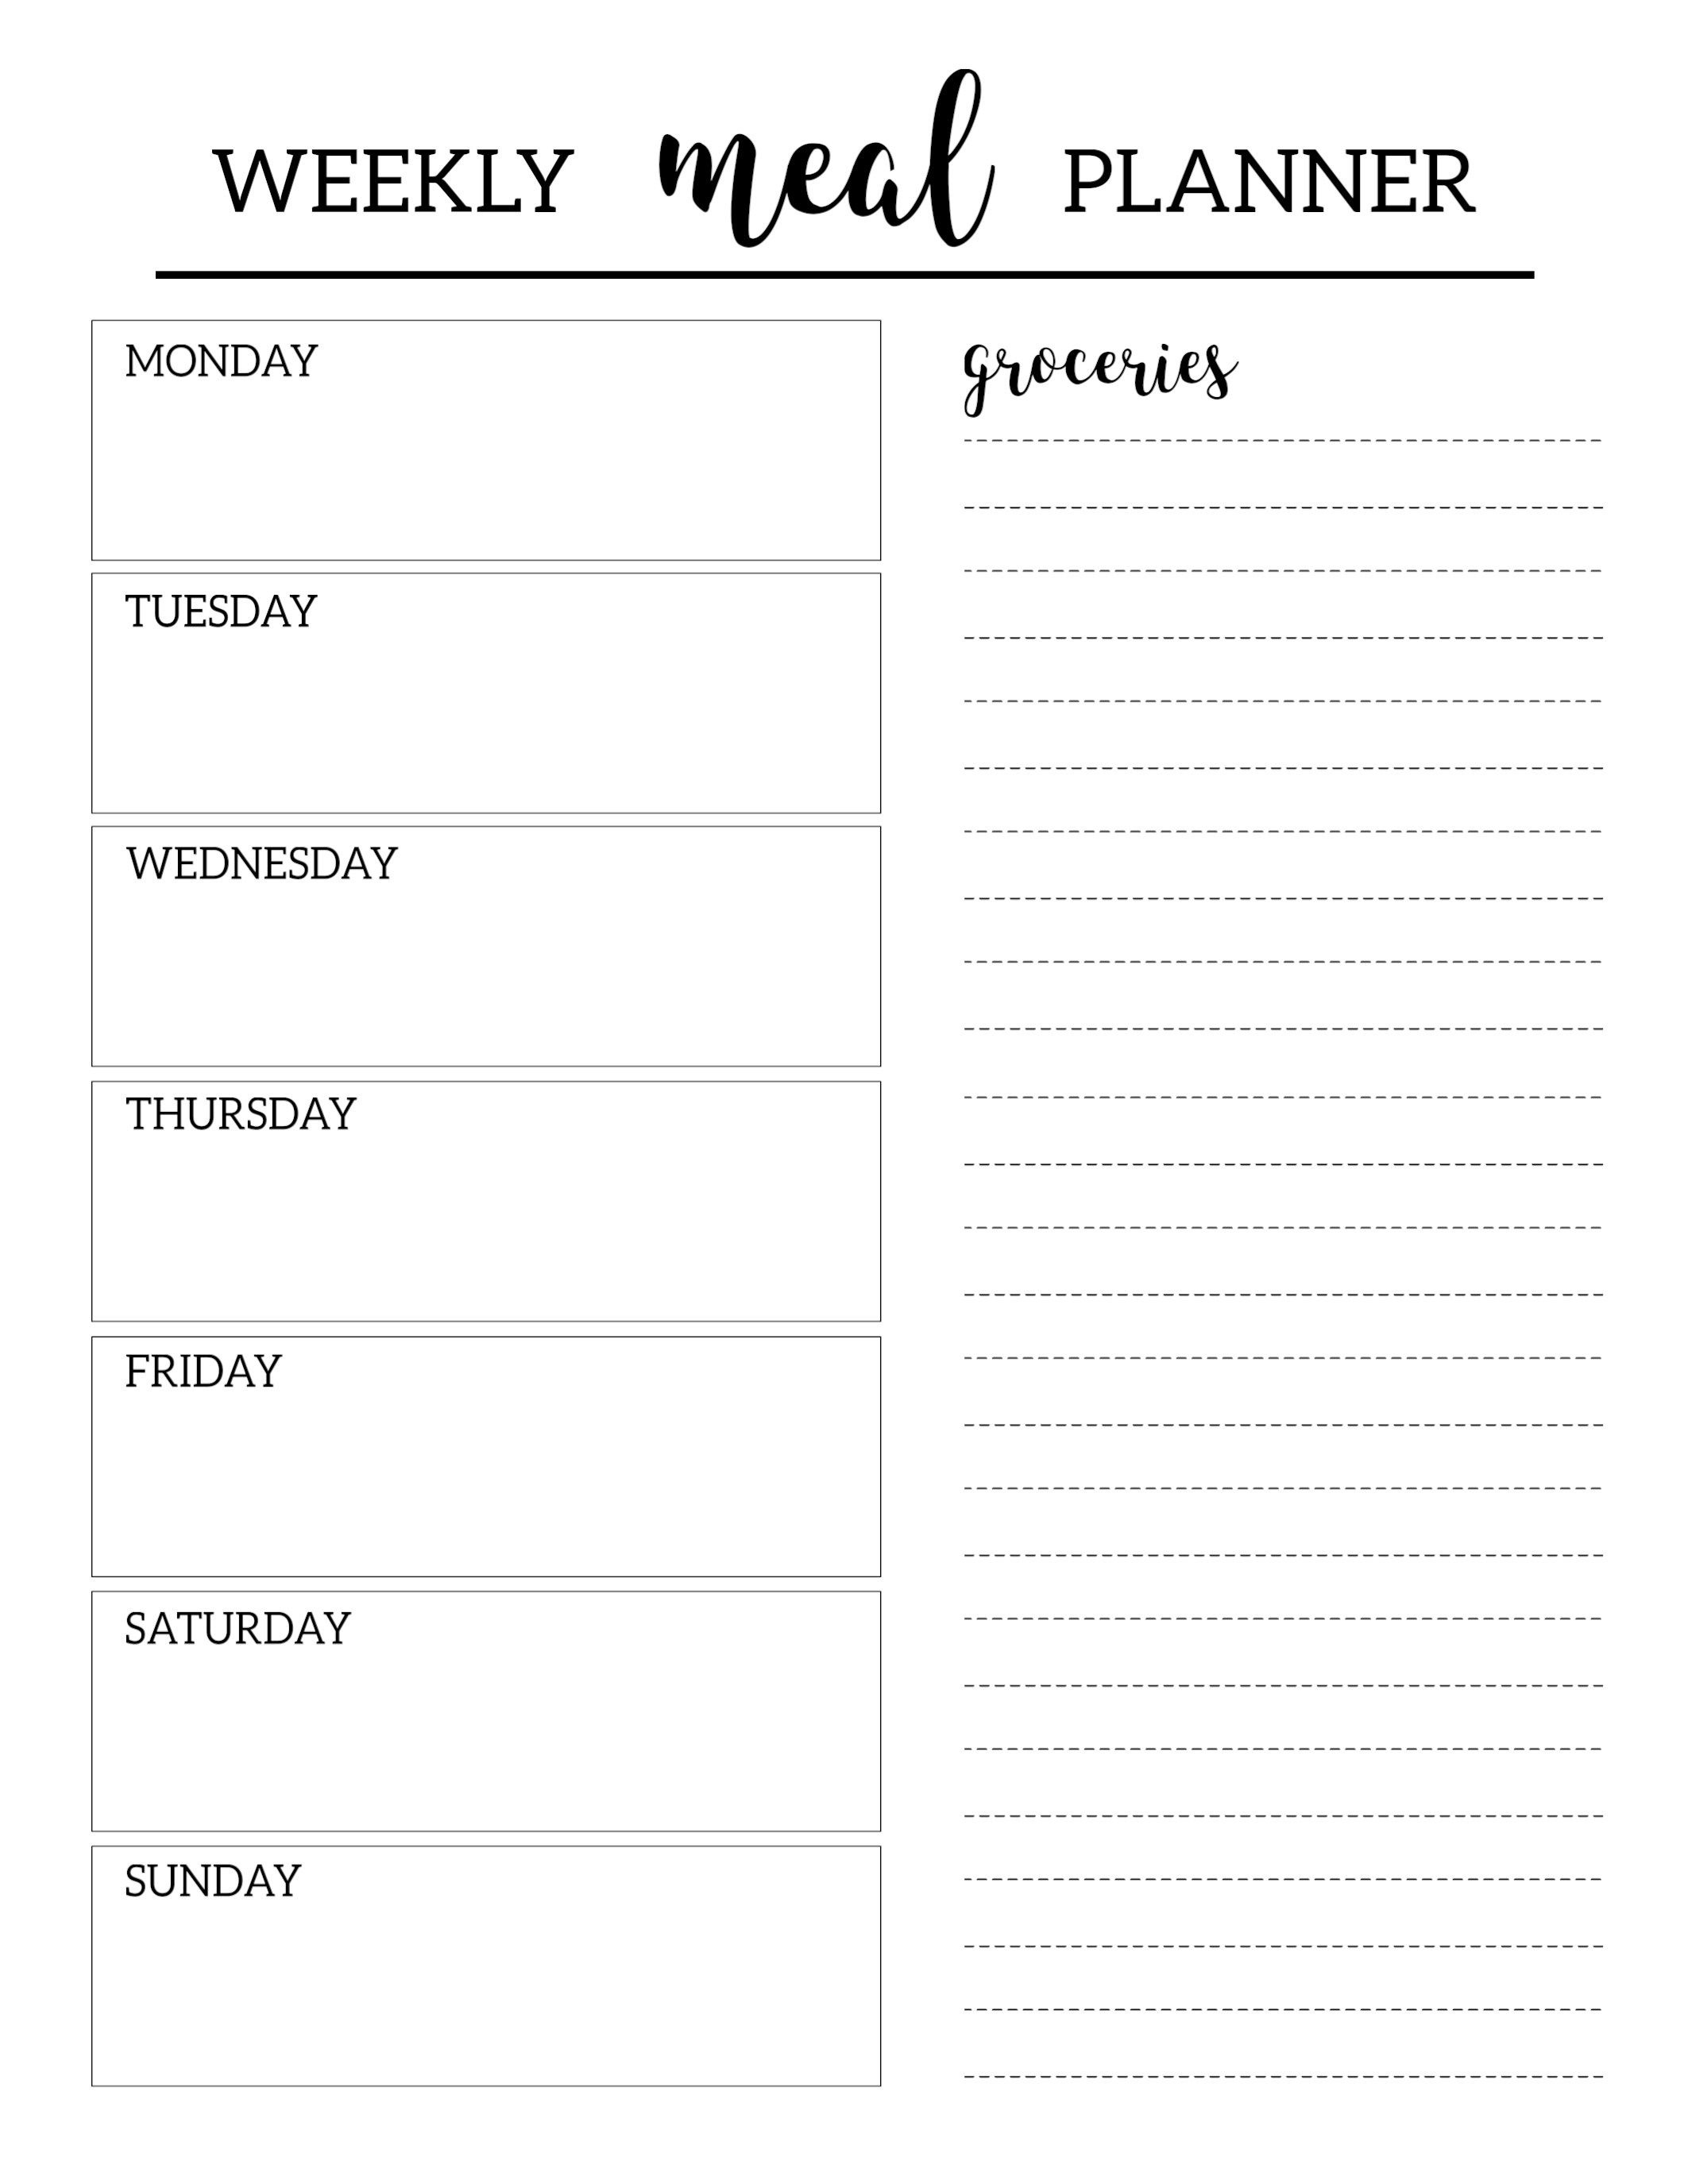 Free Printable Meal Planner Template | Organization | Meal Planner - Free Printable Menu